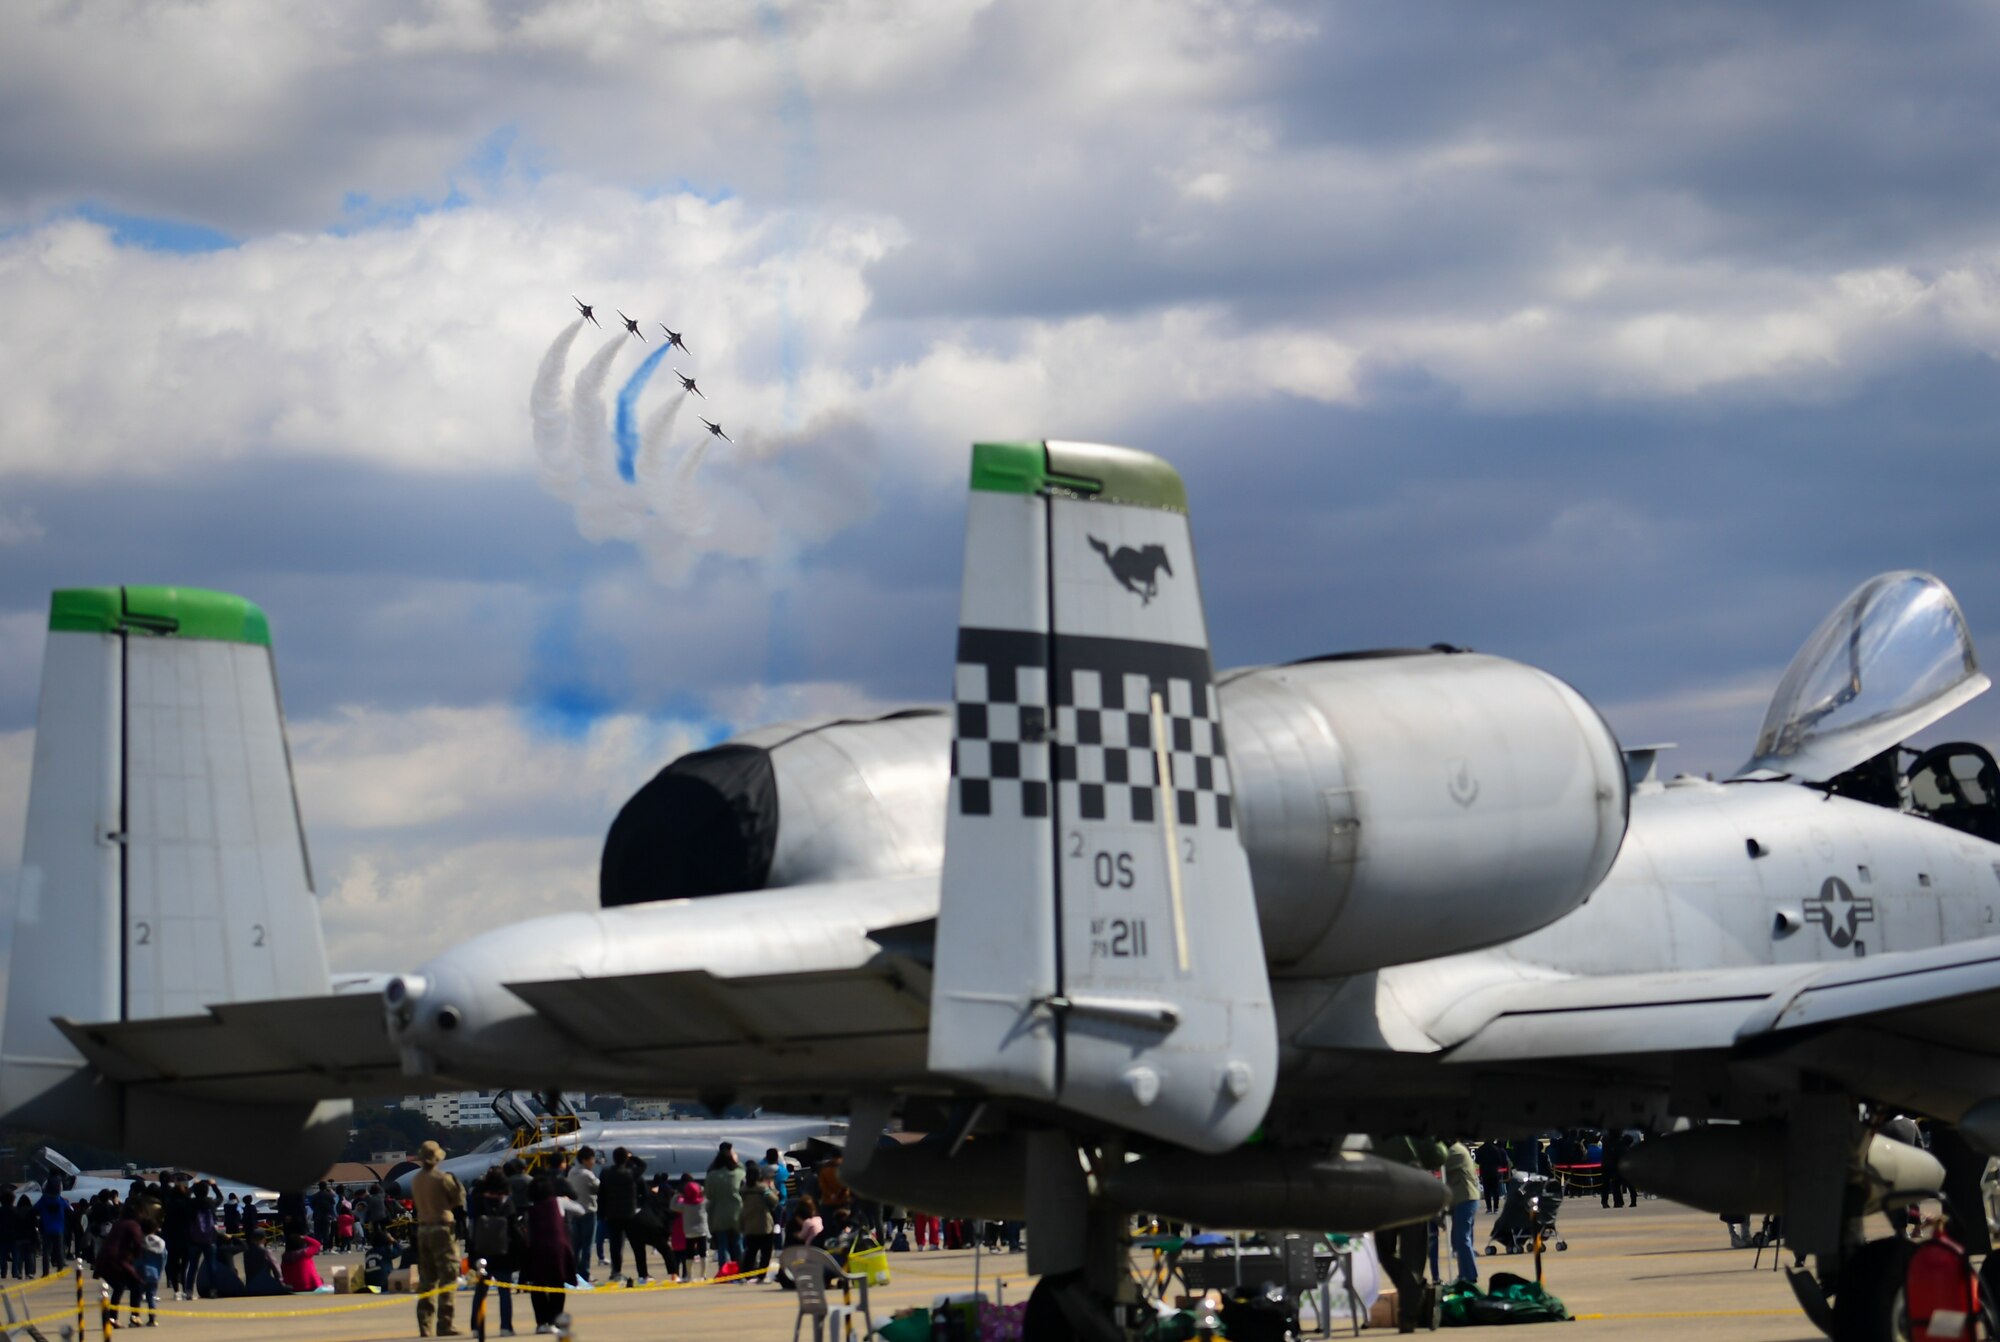 The Republic of Korea’s 53rd Demonstration Group, also known as the Black Eagles, fly above an A-10 Thunderbolt II as they perform at the Gyeongnam Sacheon Aerospace Expo at Sacheon Air Base, South Korea, Oct. 25, 2018.